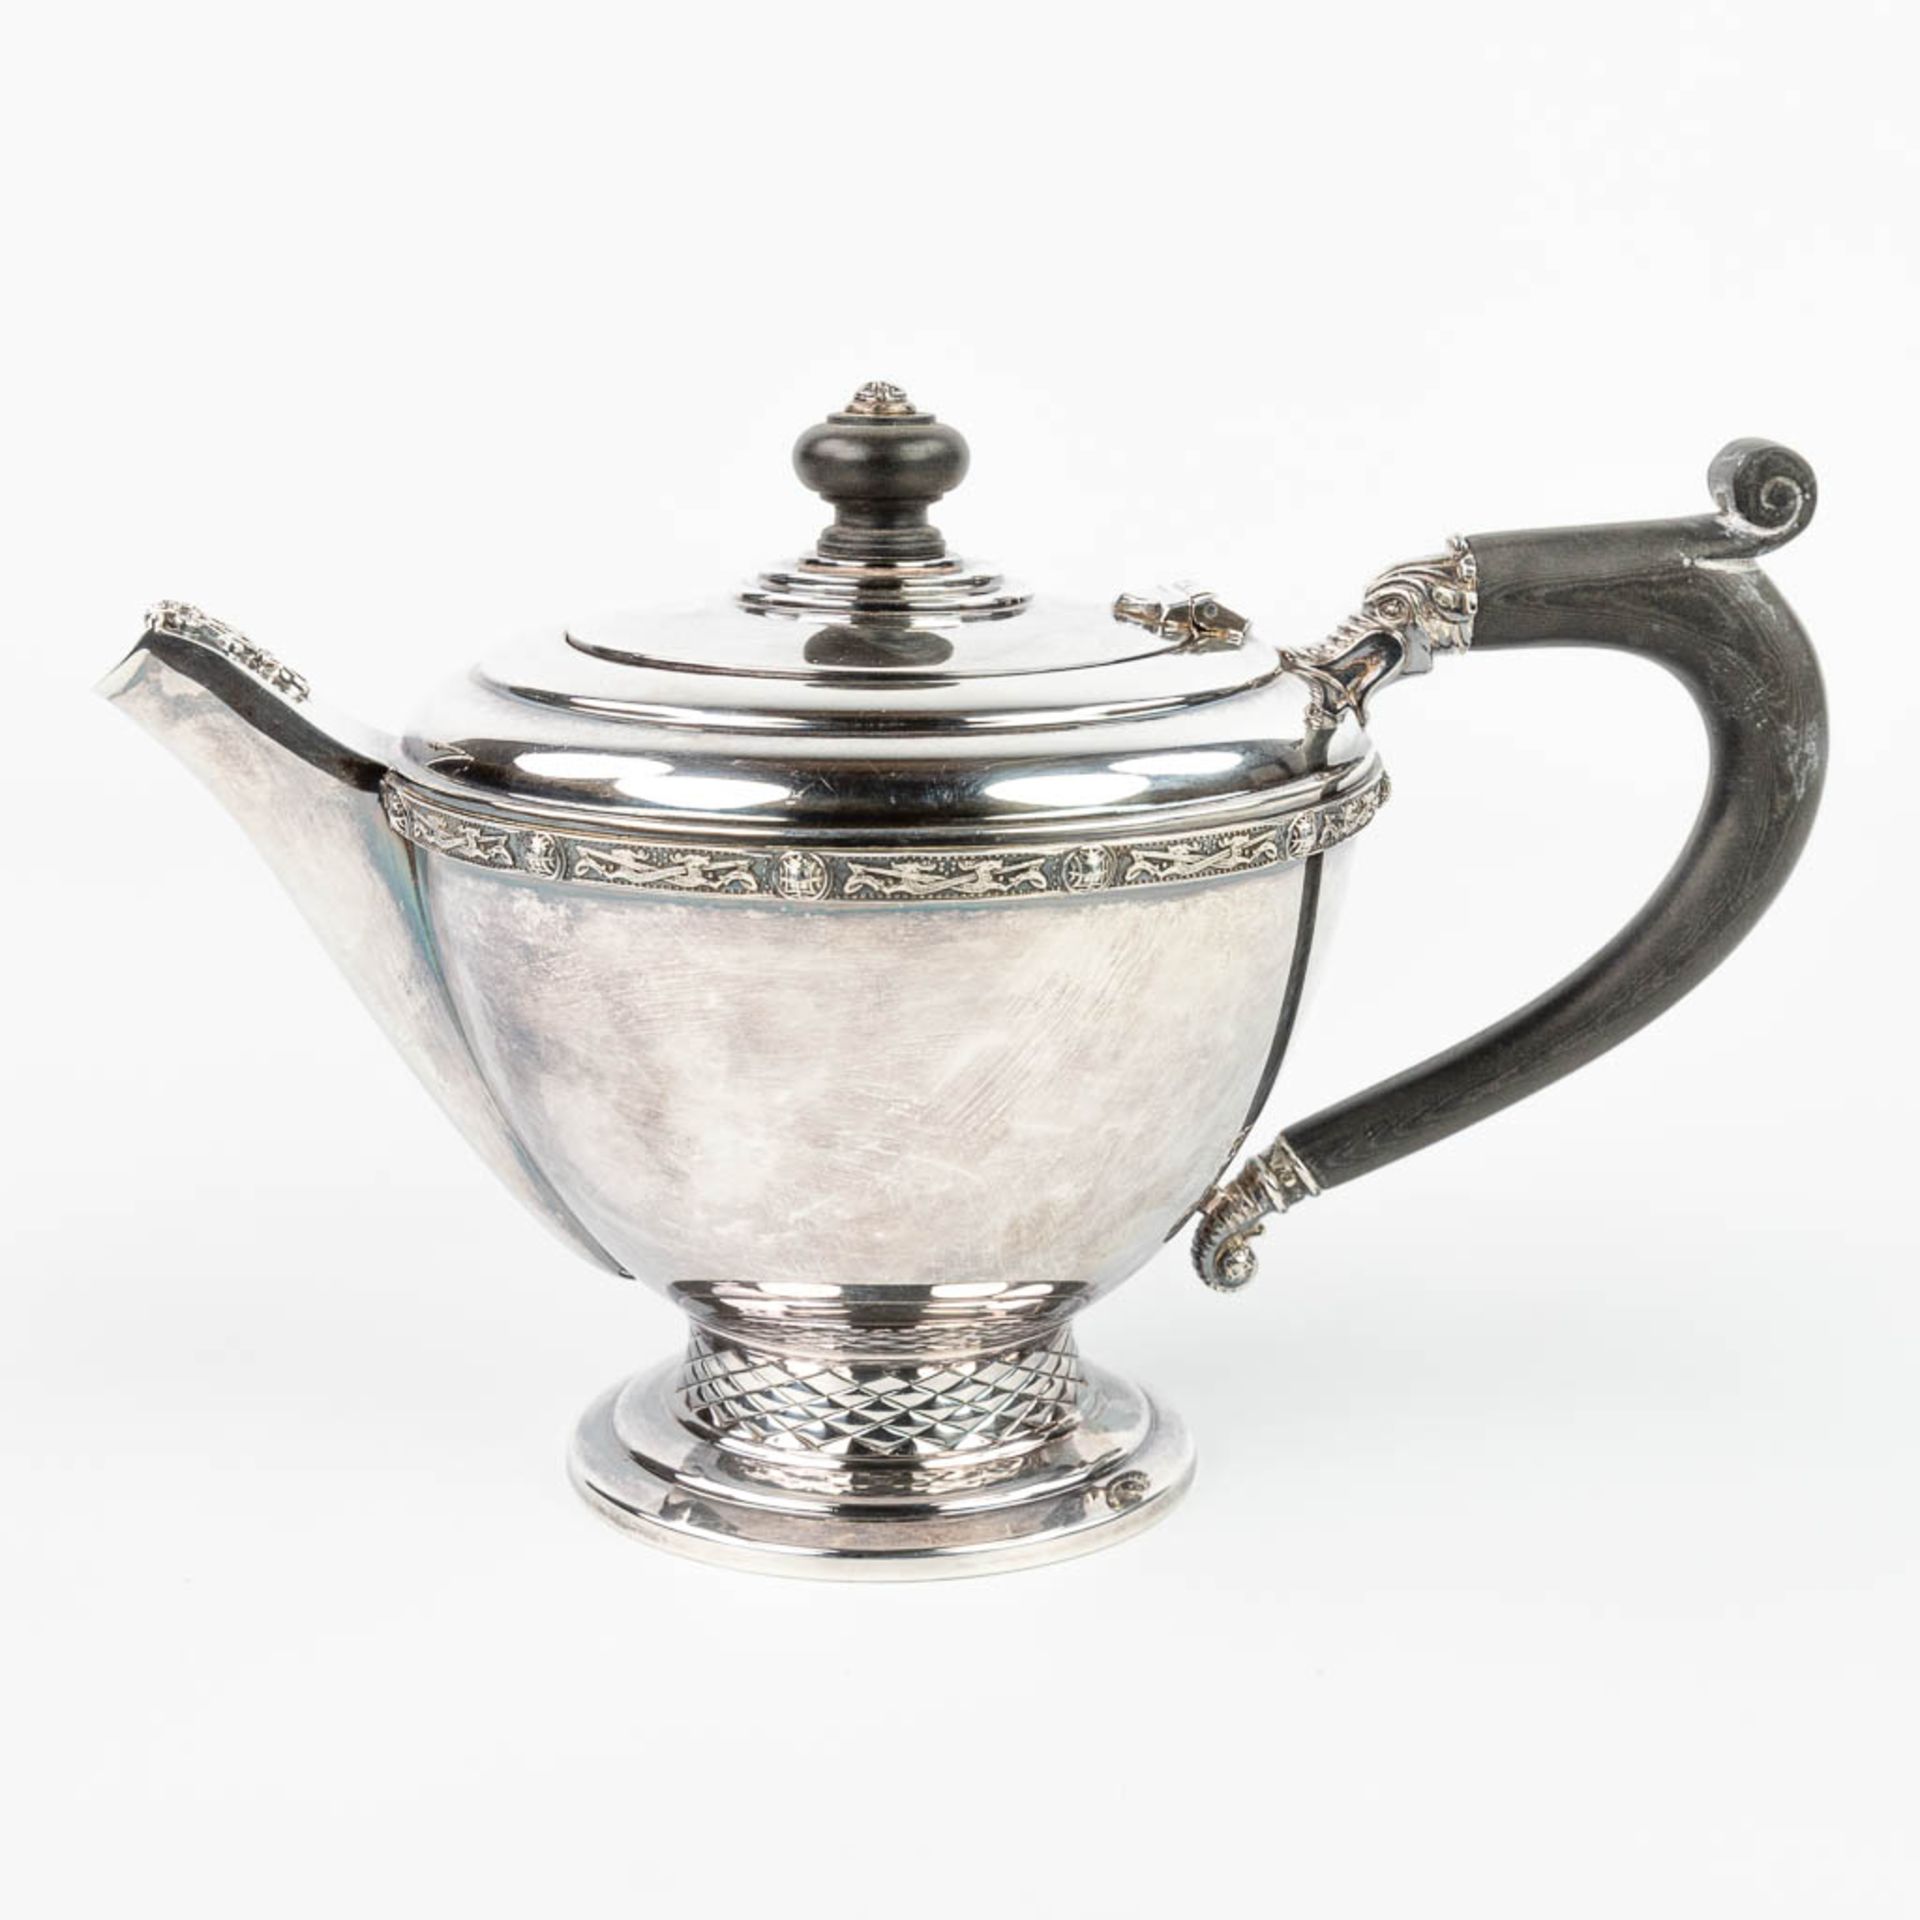 A fine silver teapot with ebony handles and made in Ireland, 1977. (H:16,5cm) - Image 15 of 18